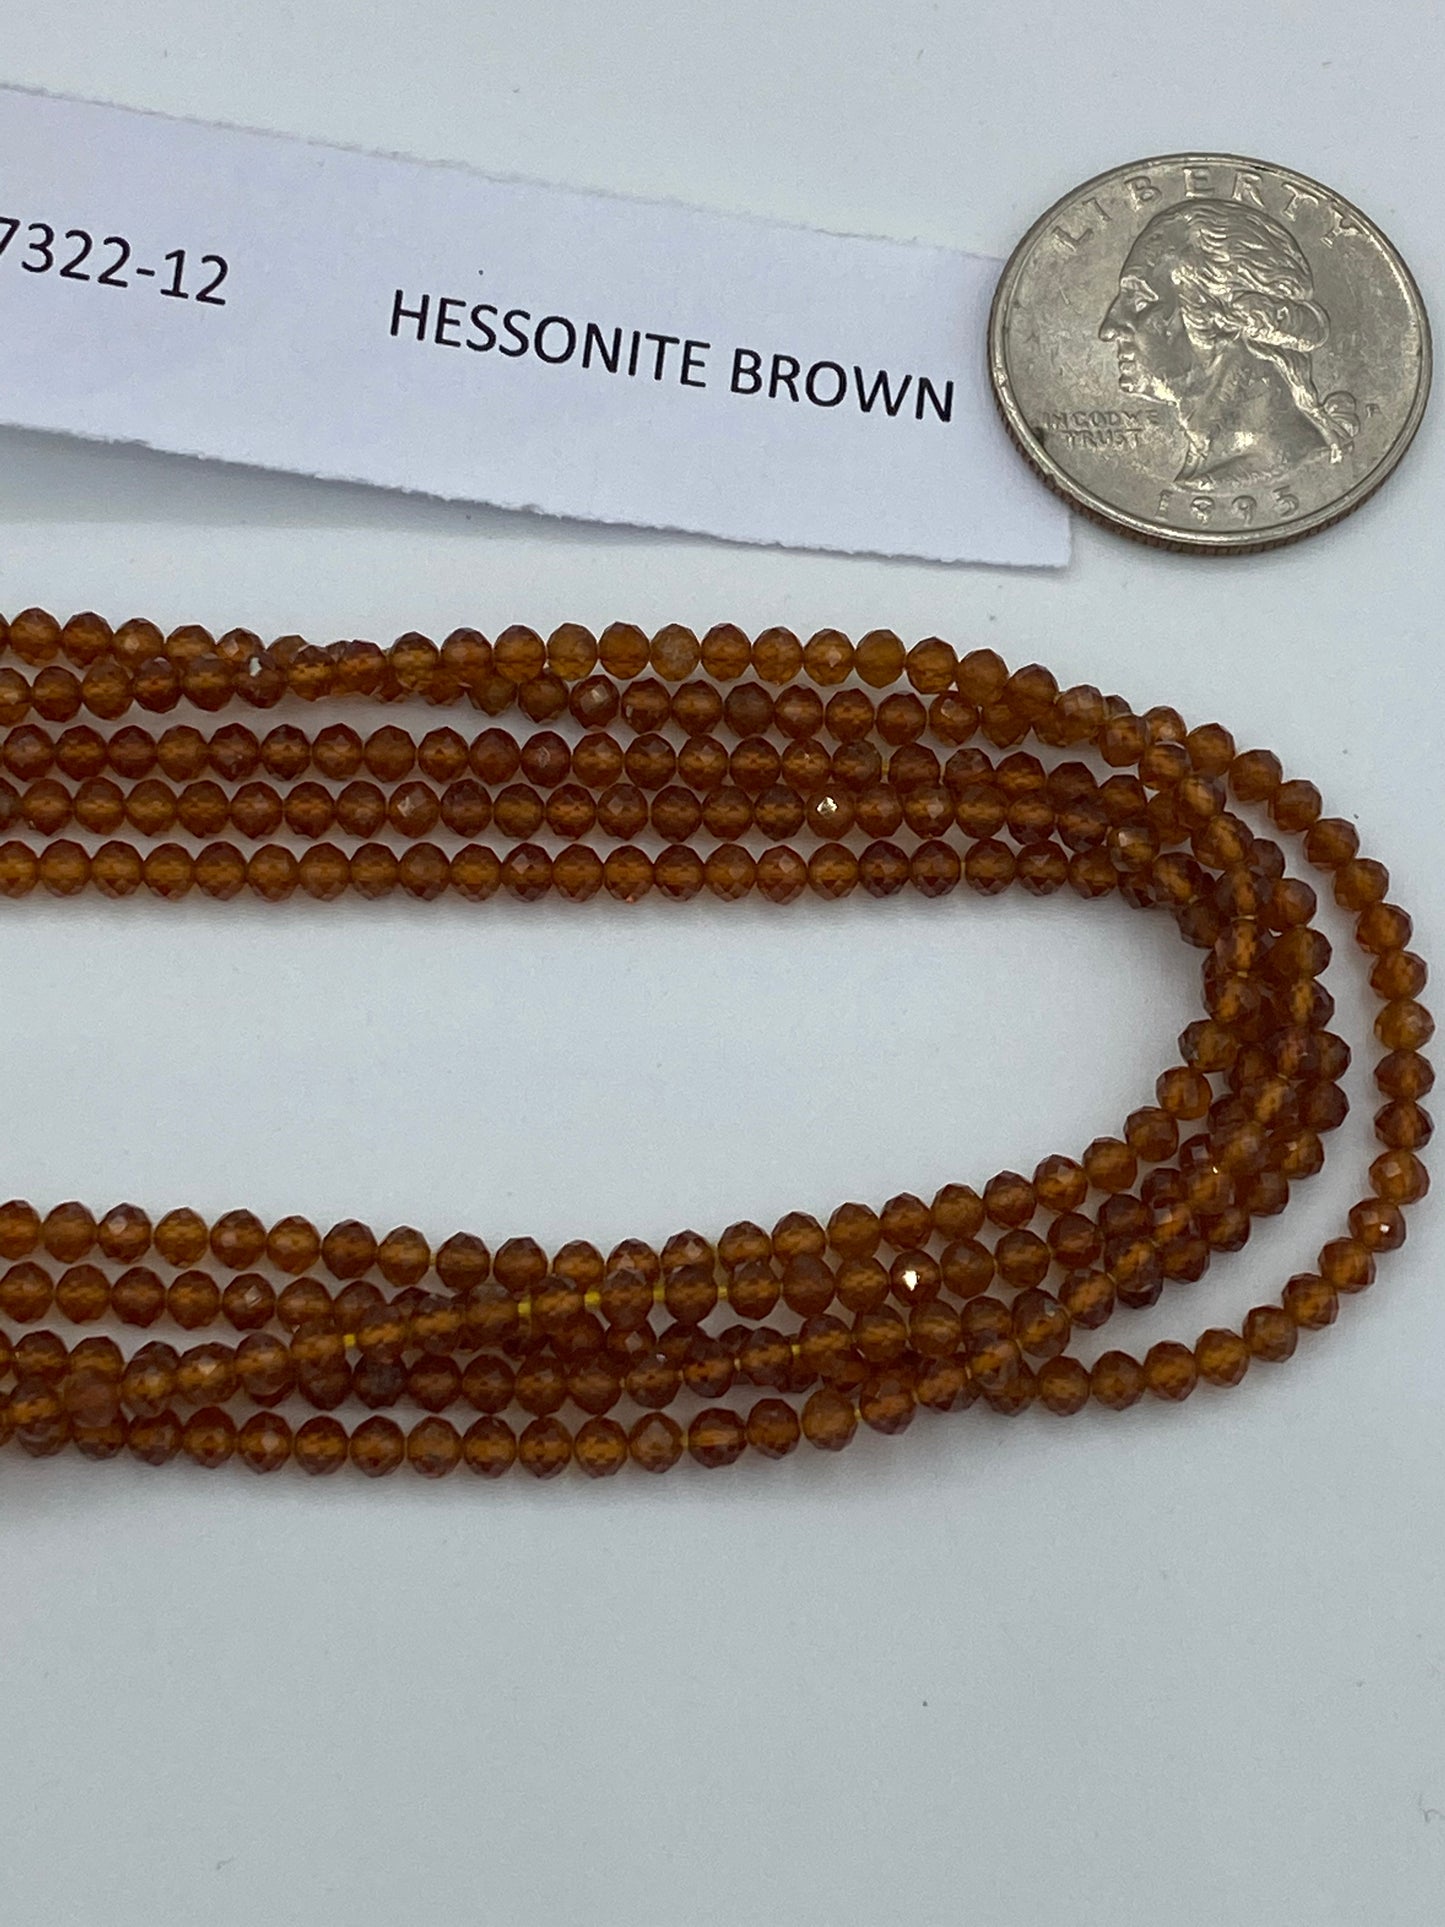 HESSONITE BROWN GARNET BEADS ROUND FACETED 3-4MM